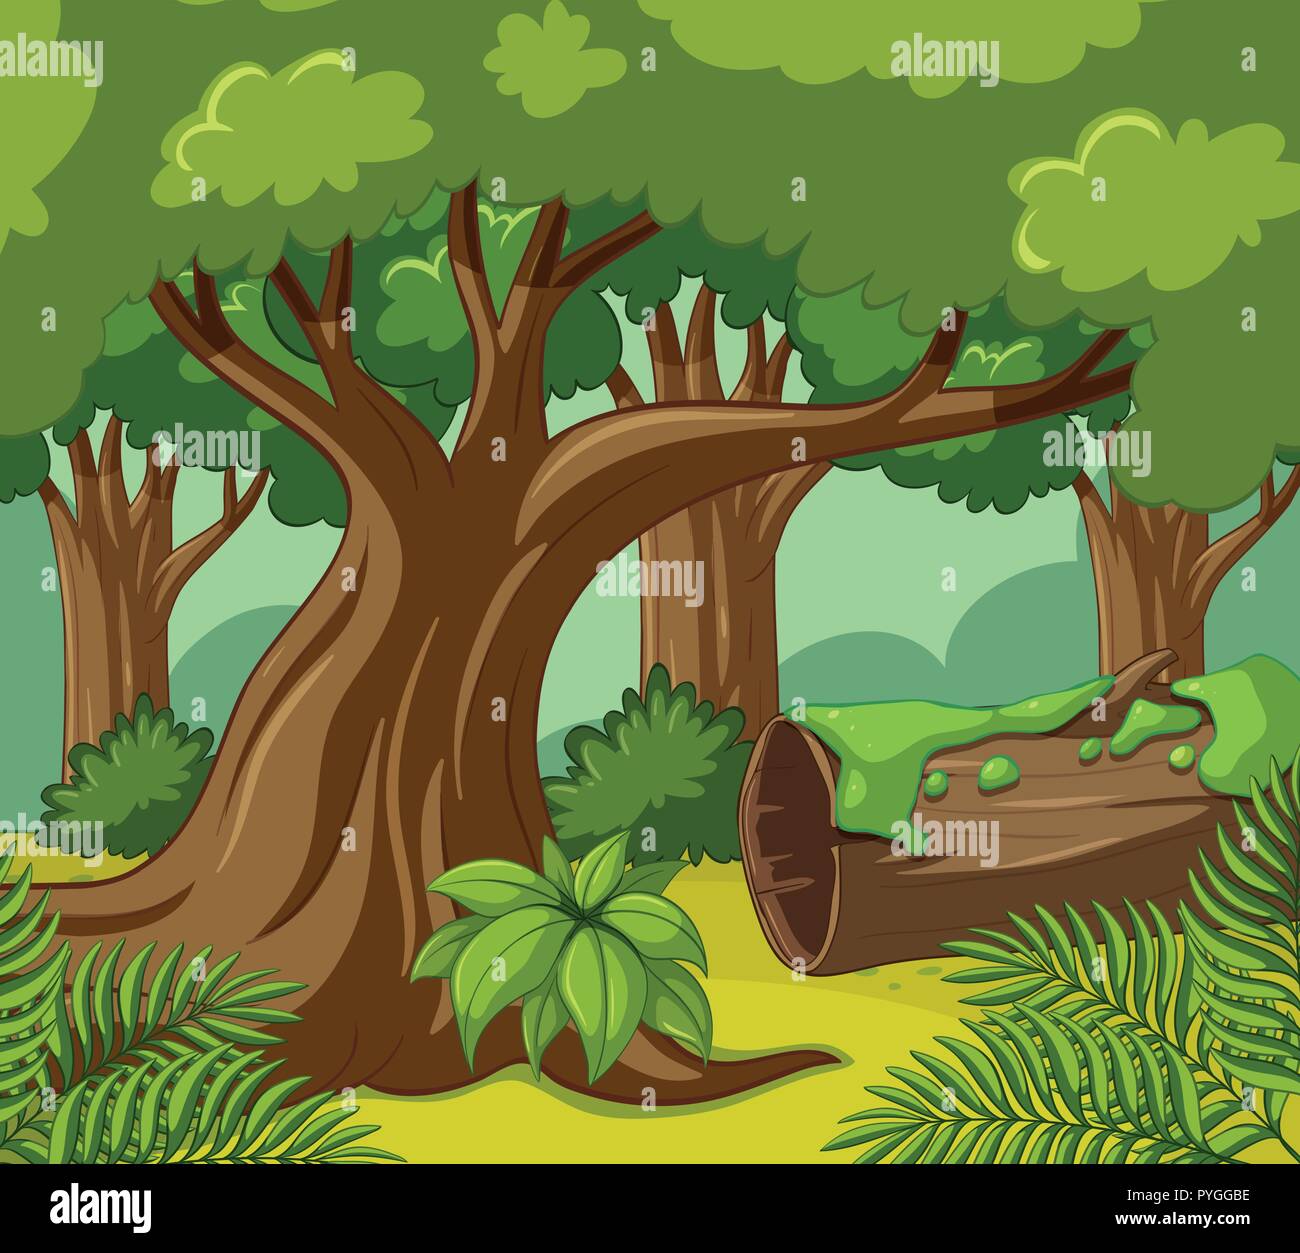 Forest scene with many trees illustration Stock Vector